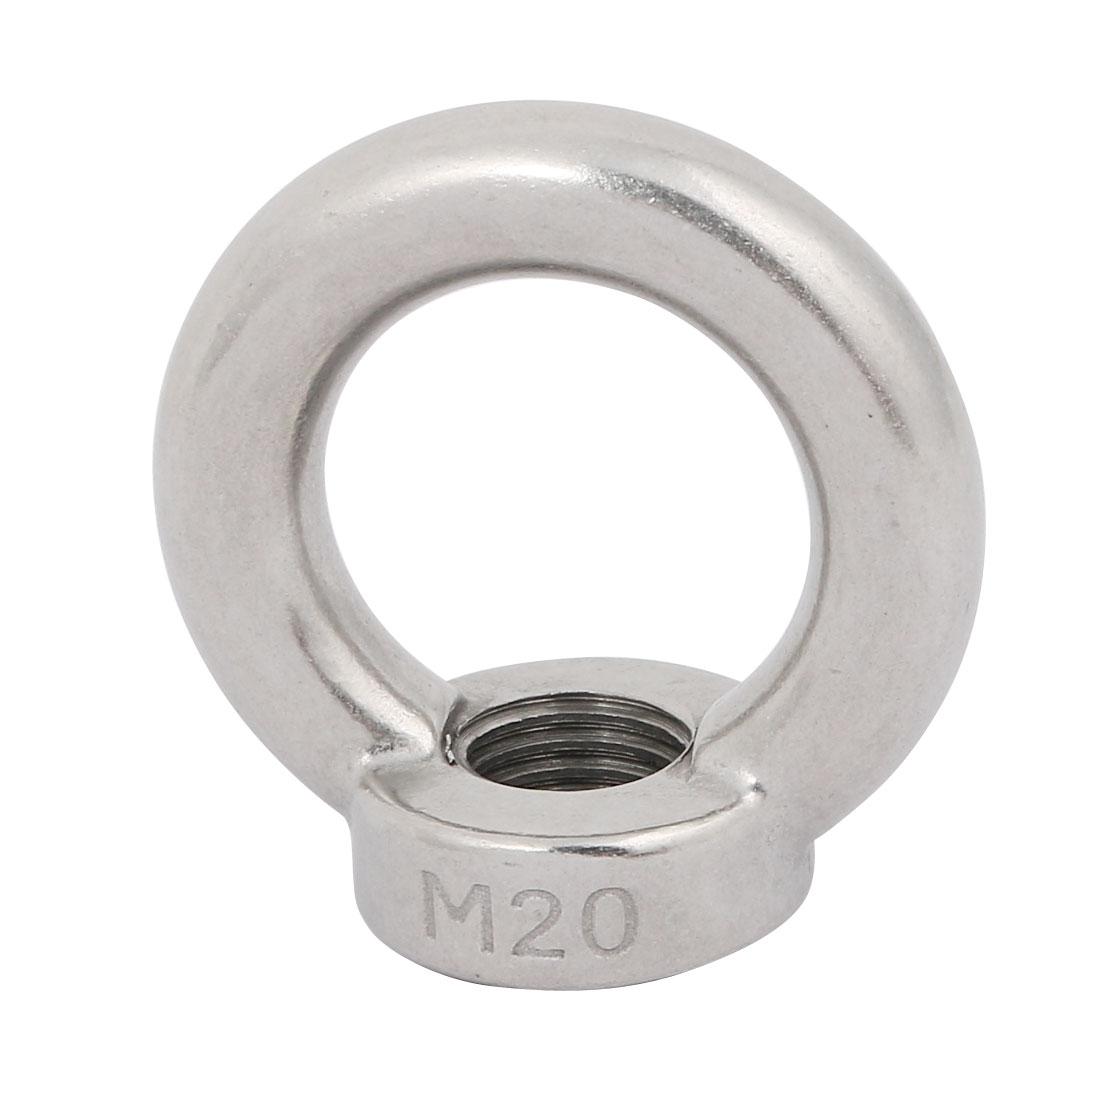 uxcell Lifting Eye Nut M4 Female Thread 304 Stainless Steel Round Shape for Rope Fitting Pack of 4